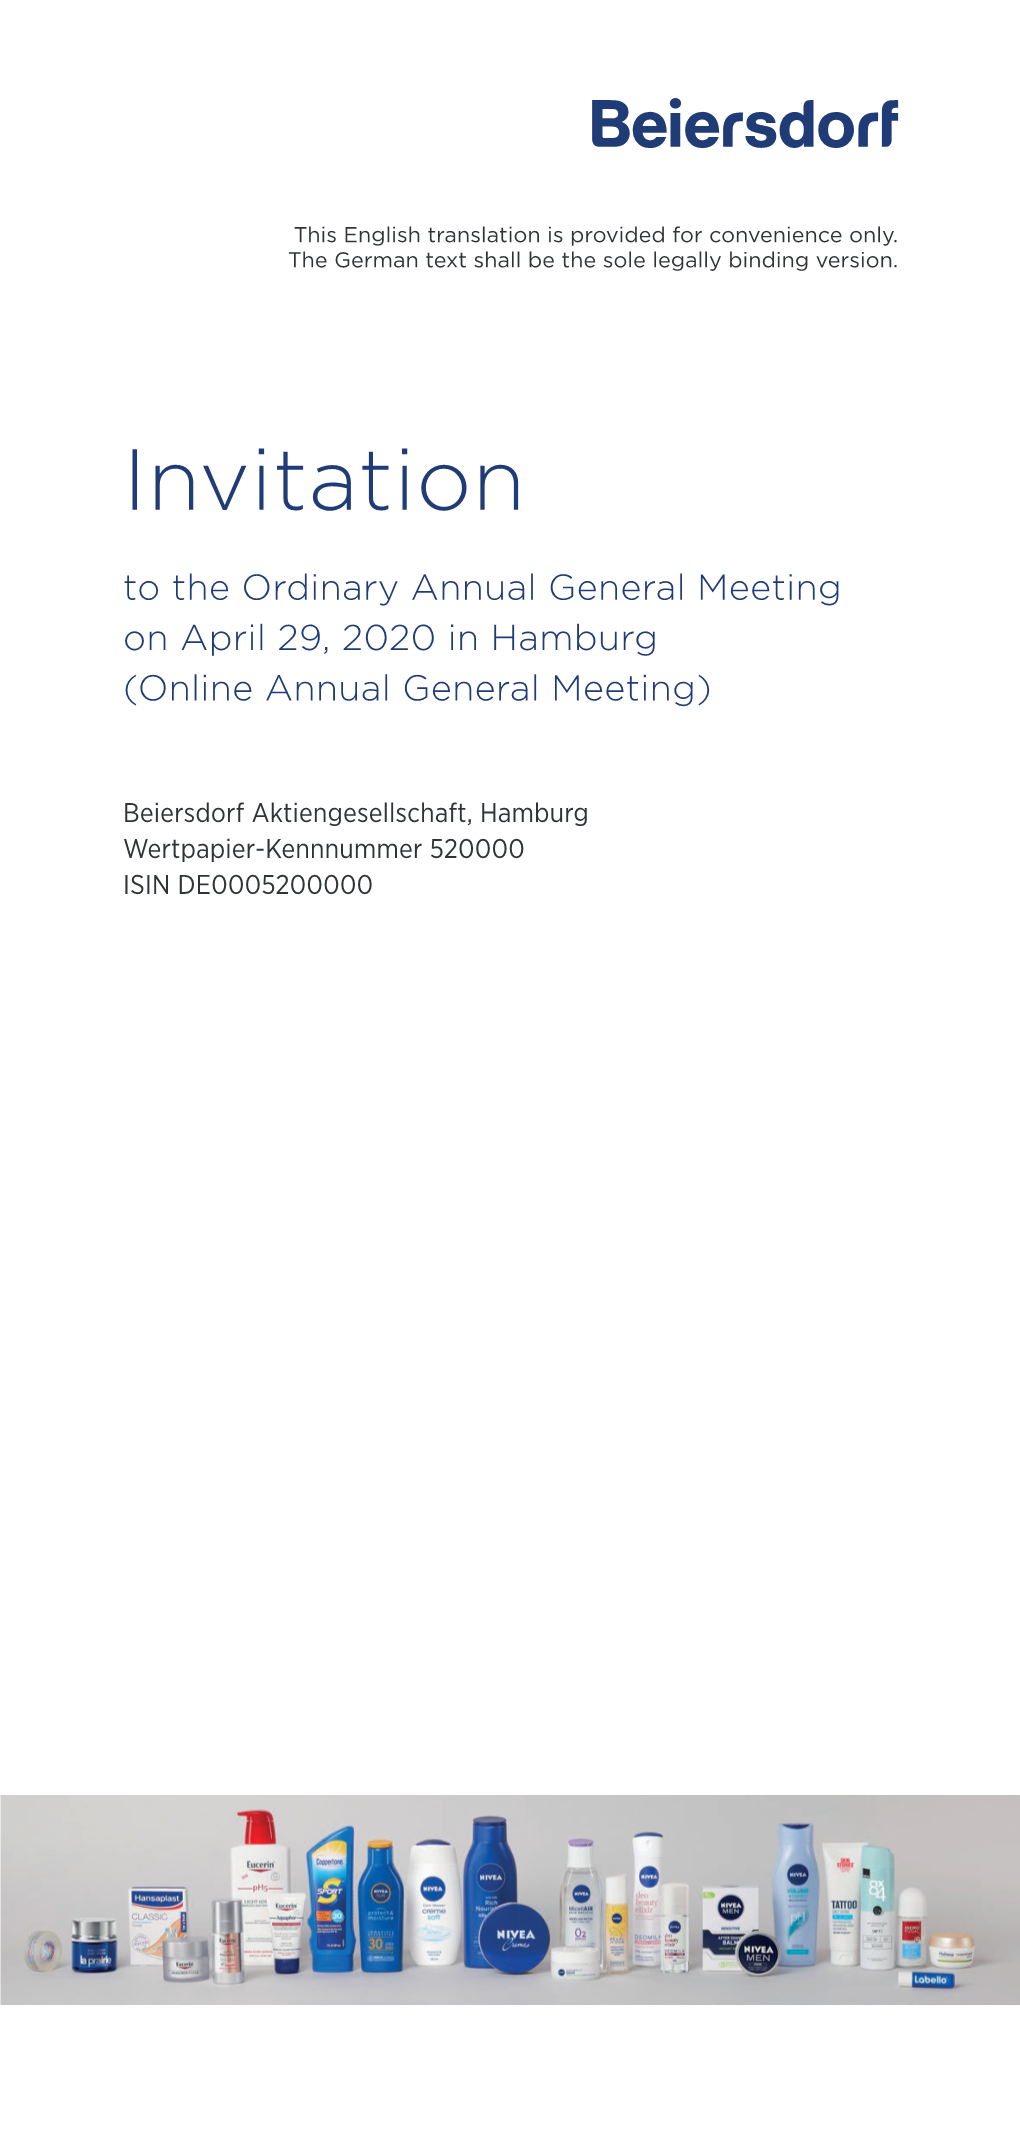 Invitation to the Ordinary Annual General Meeting on April 29, 2020 in Hamburg (Online Annual General Meeting)